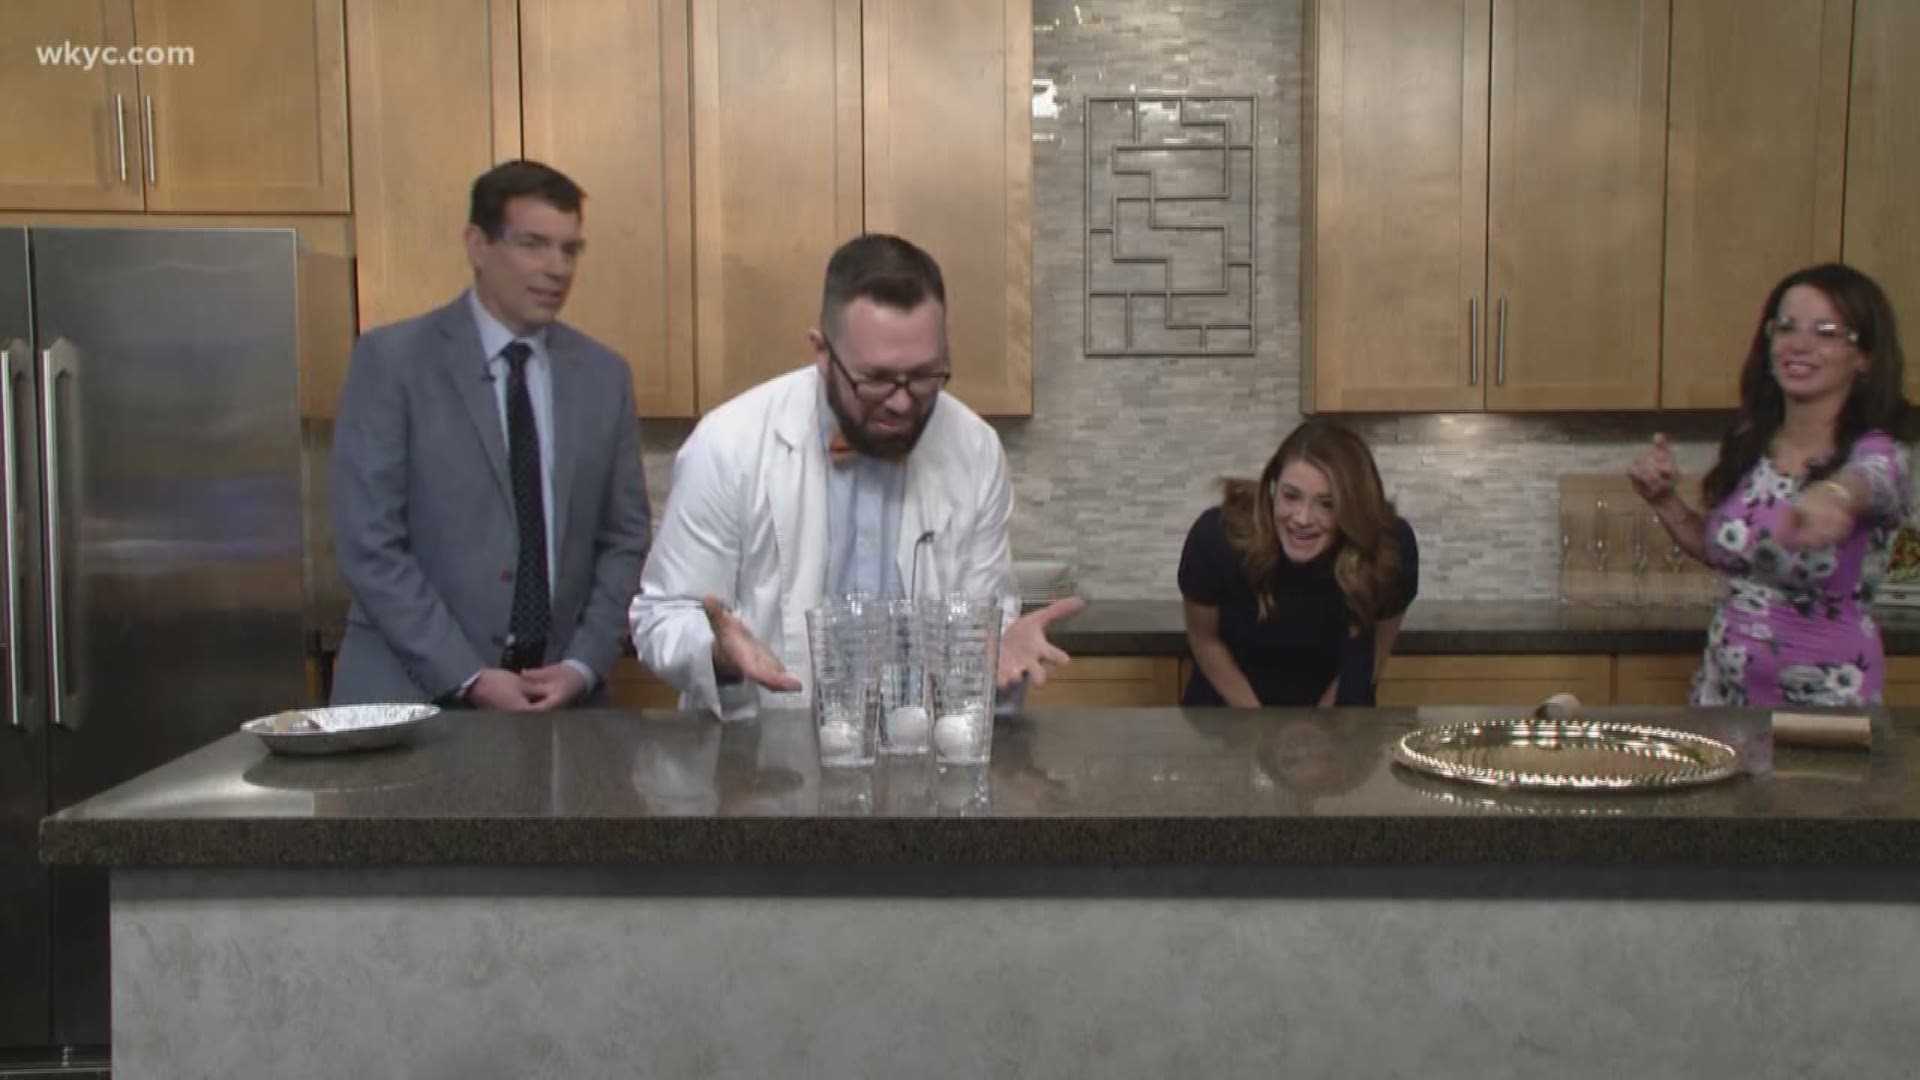 Feb. 22, 2019: How cool is this? Mr. Science dropped by our studios this morning to show some of the coolest experiments you can try with your kids.